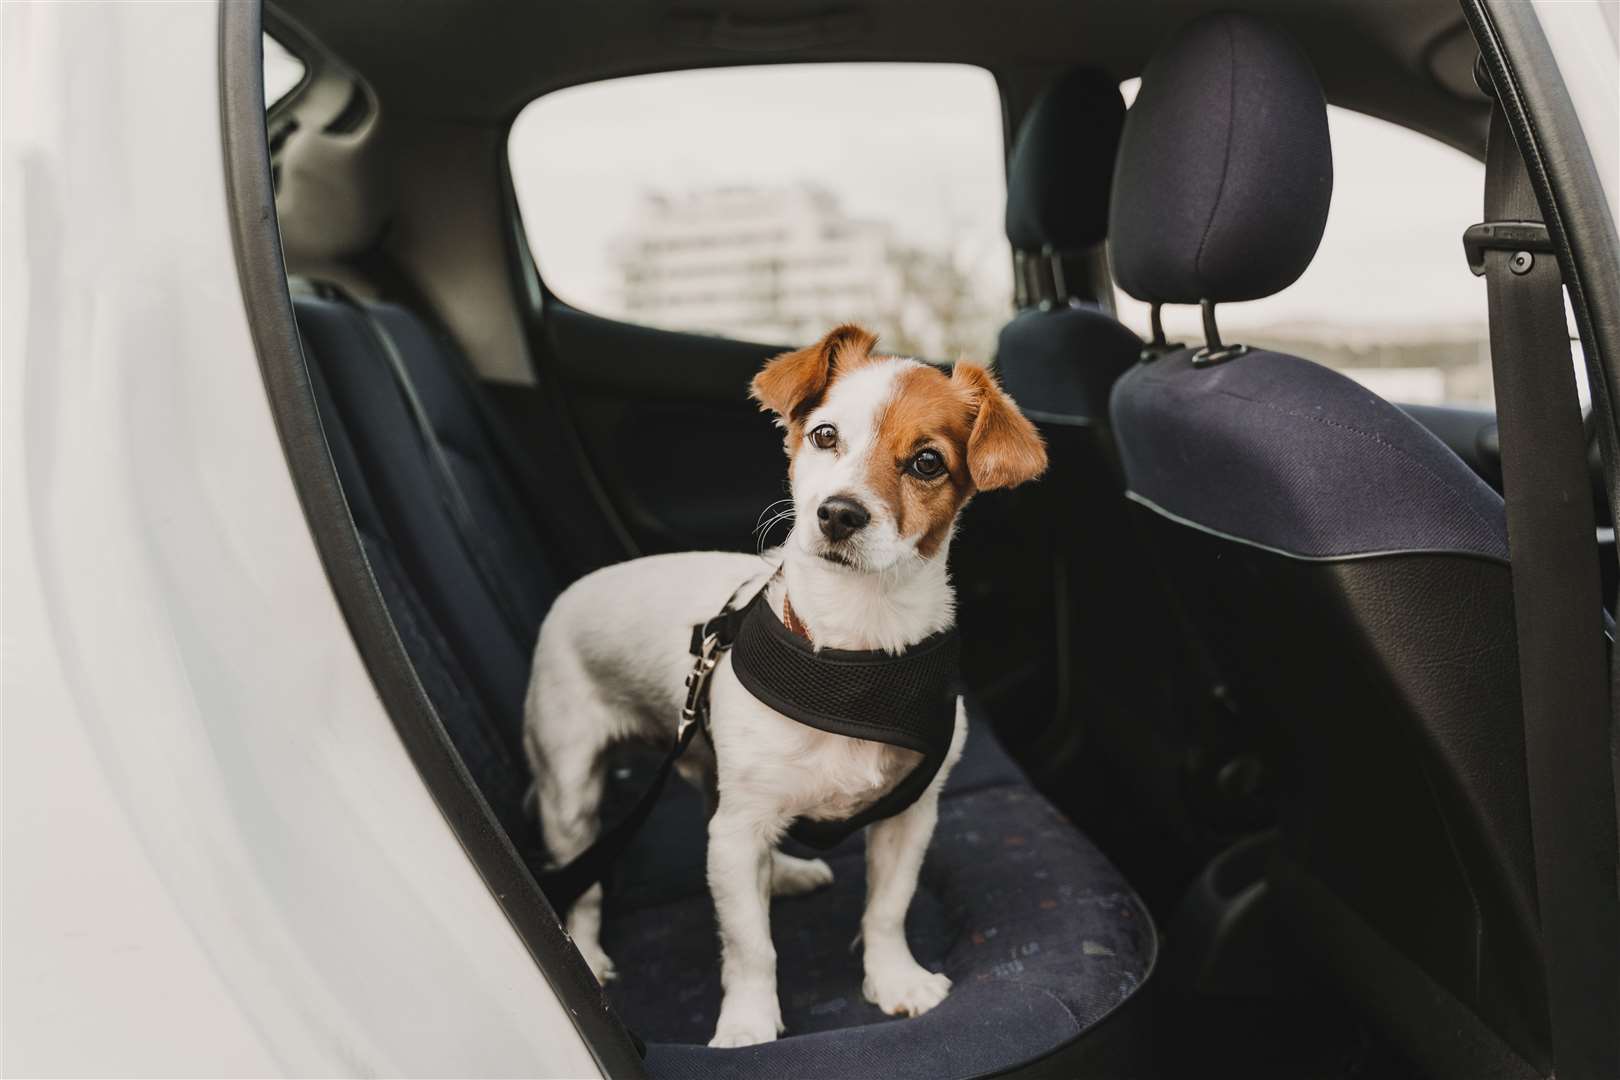 Dogs should never be left in cars unattended says the RSPCA. Photo: Stock image.